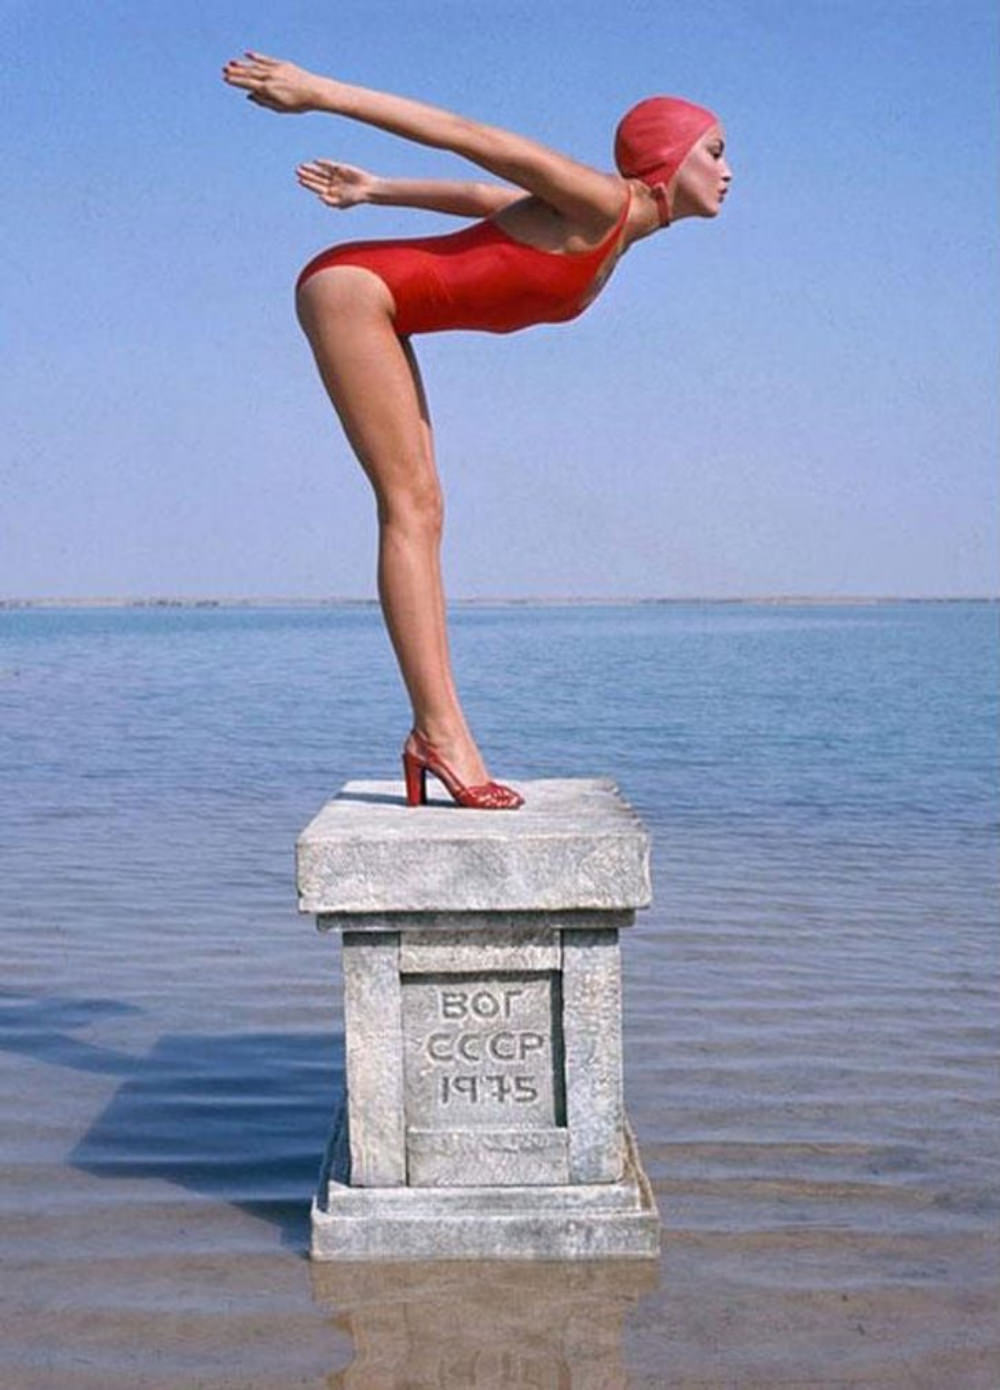 Gorgeous Photos of Jerry Hall captured by Norman Parkinson for British Vogue in 1975